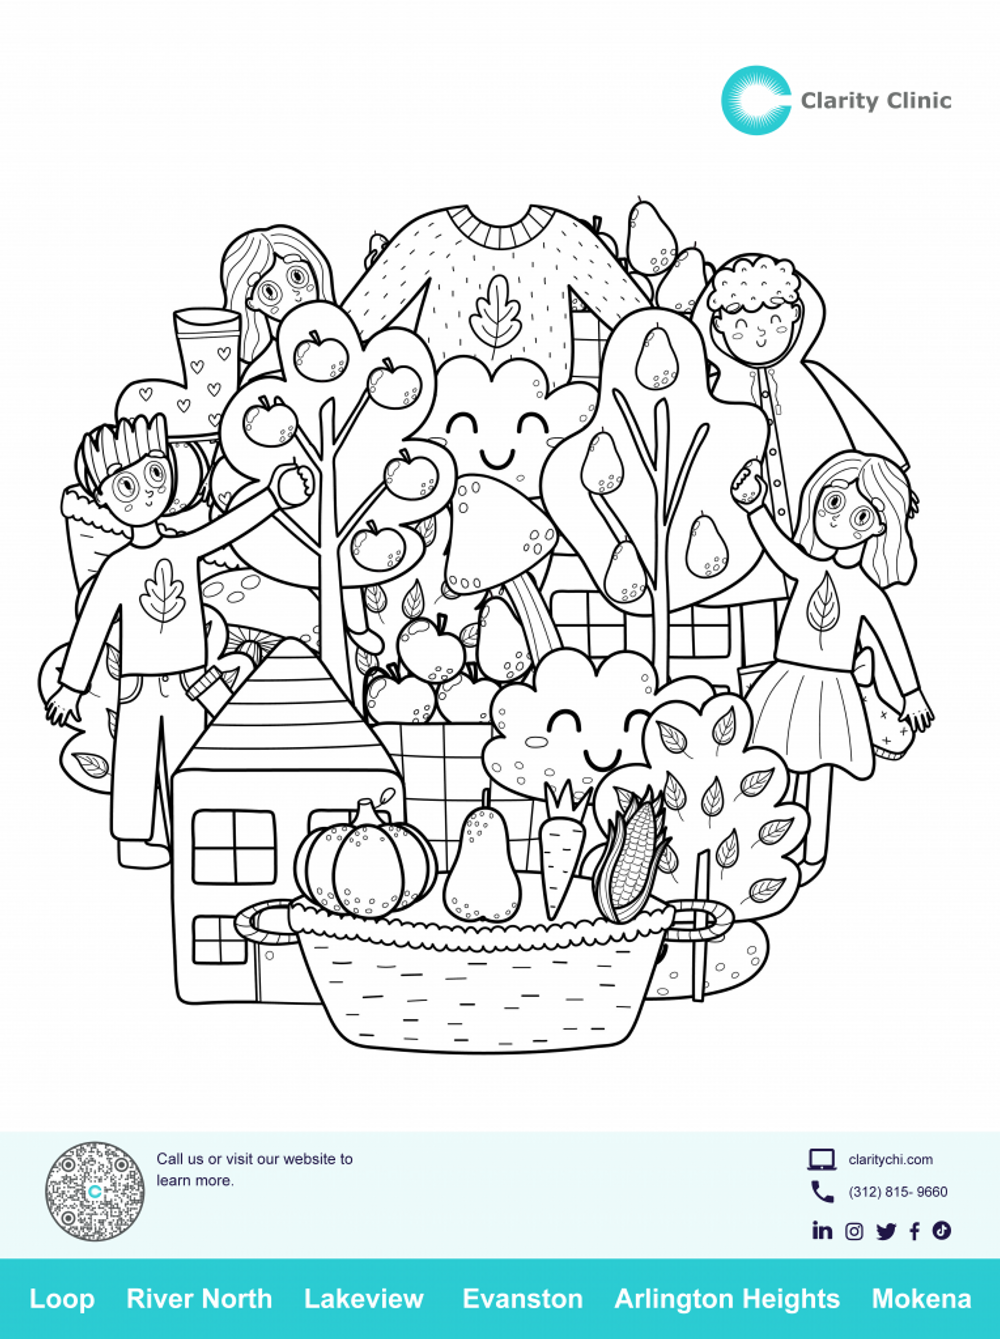 Nature Color by Number Adult Coloring Book 30 Digital Coloring Pages  Printable PDF Download Stress Relief Mental Health -  Finland